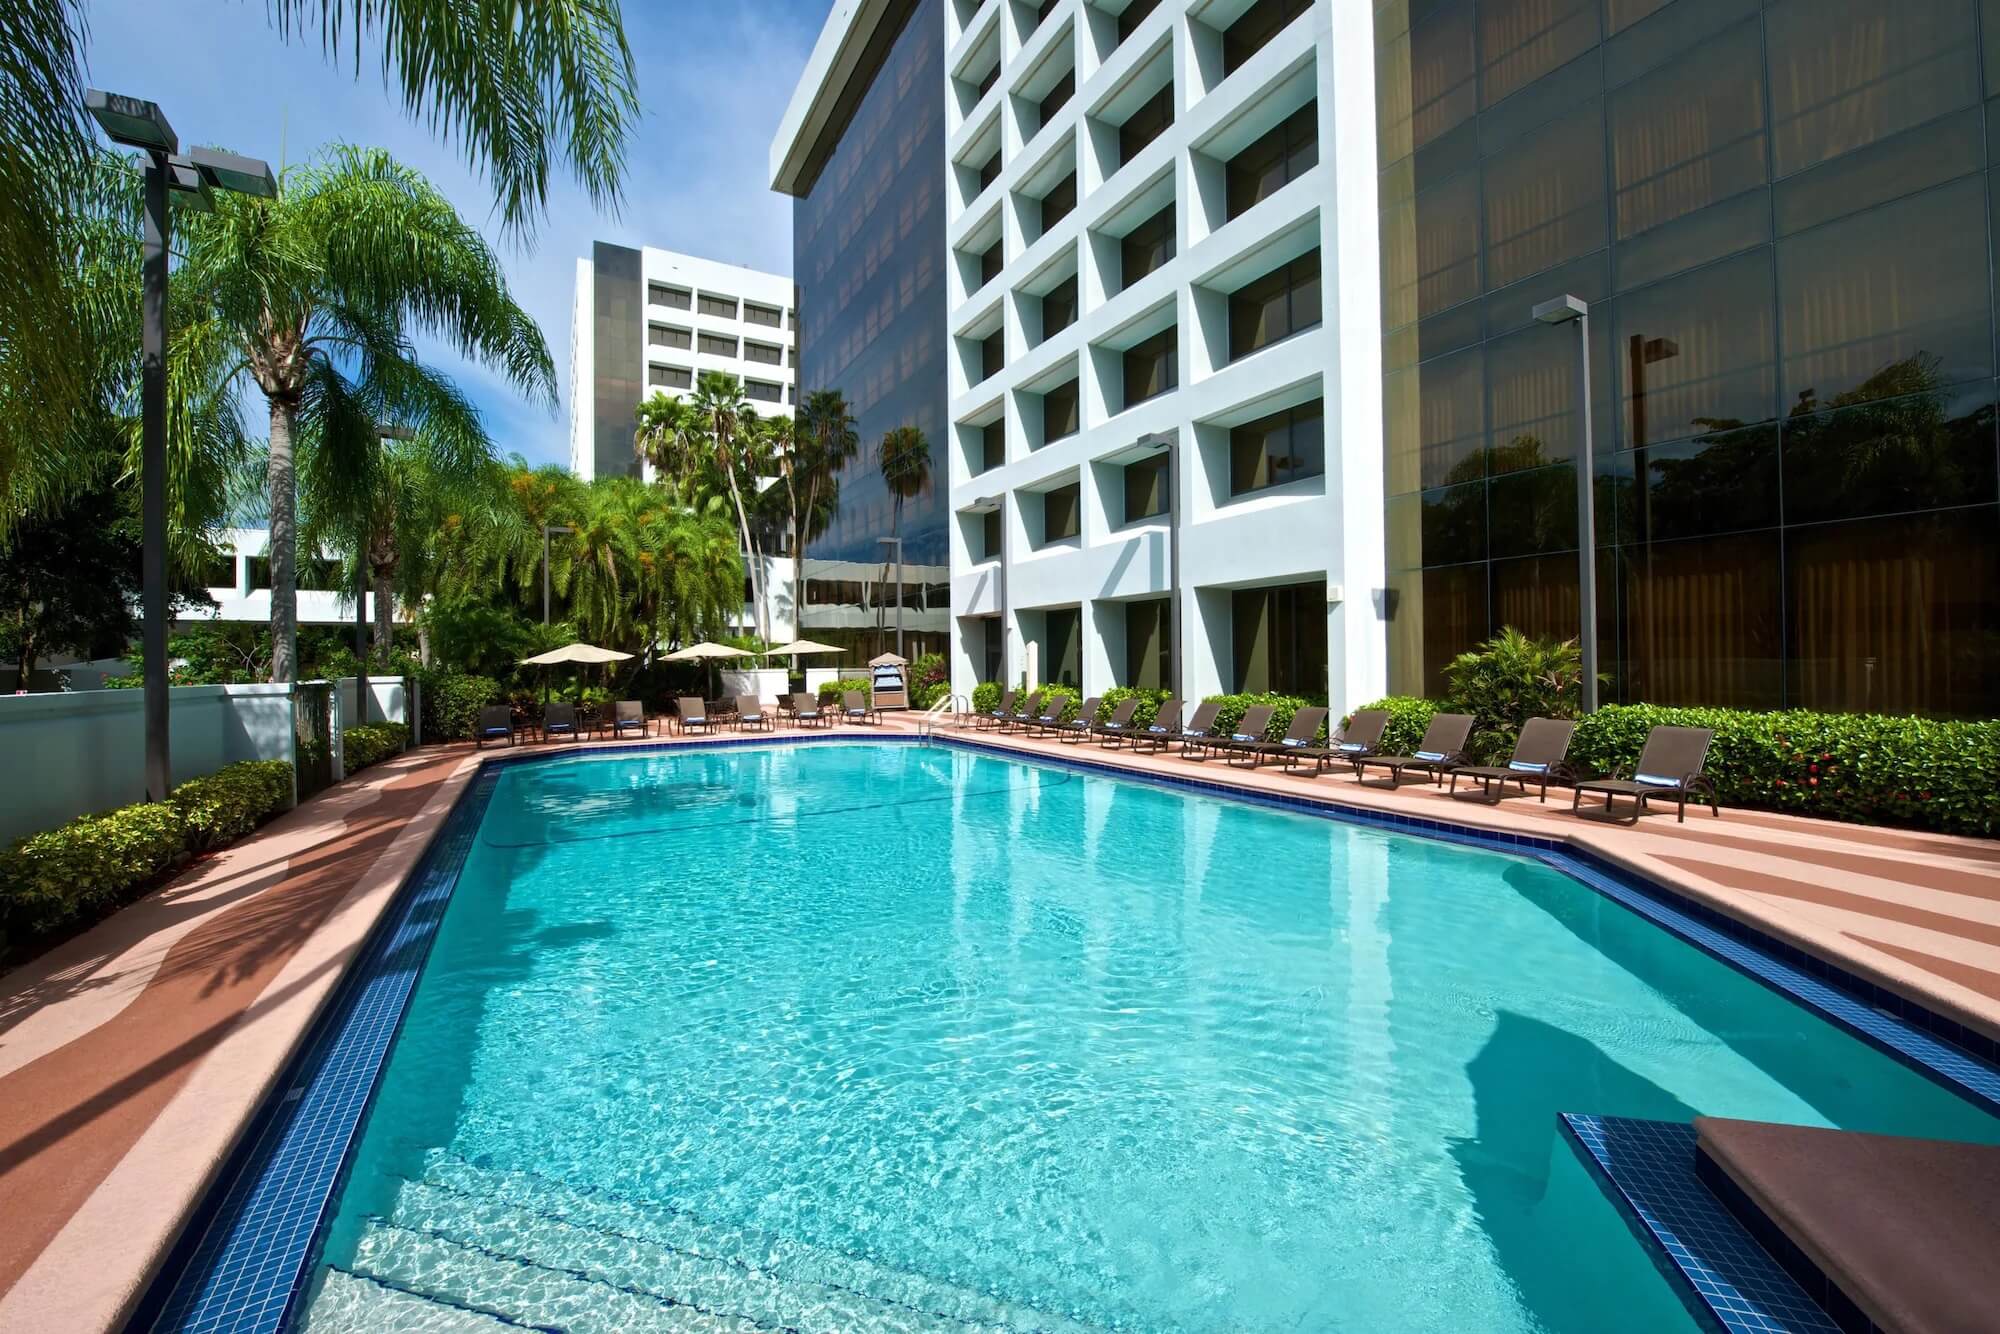 Commercial Pool Builds-SoFlo Pool and Spa Builders of Wellington